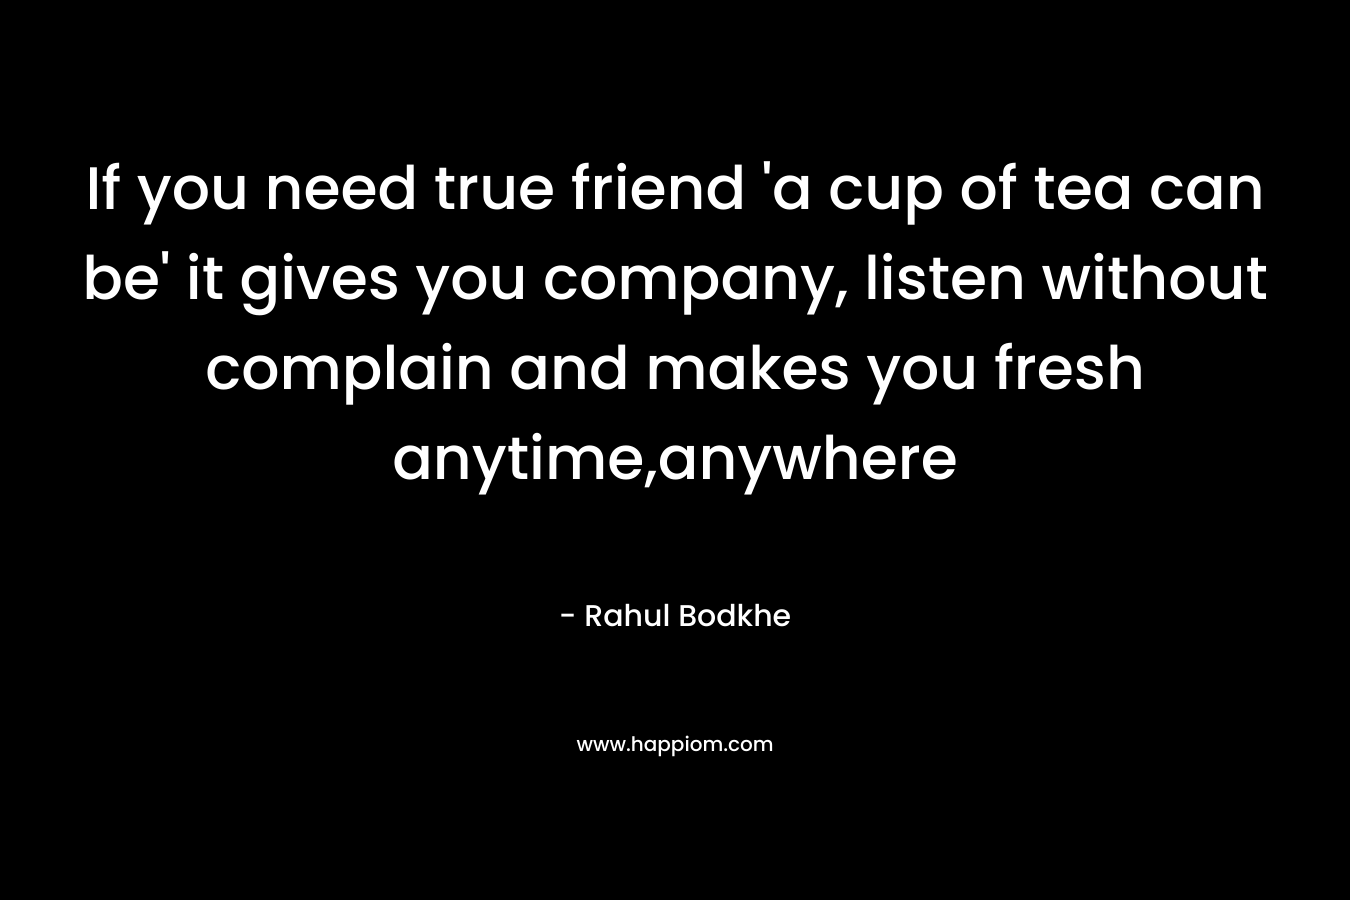 If you need true friend 'a cup of tea can be' it gives you company, listen without complain and makes you fresh anytime,anywhere